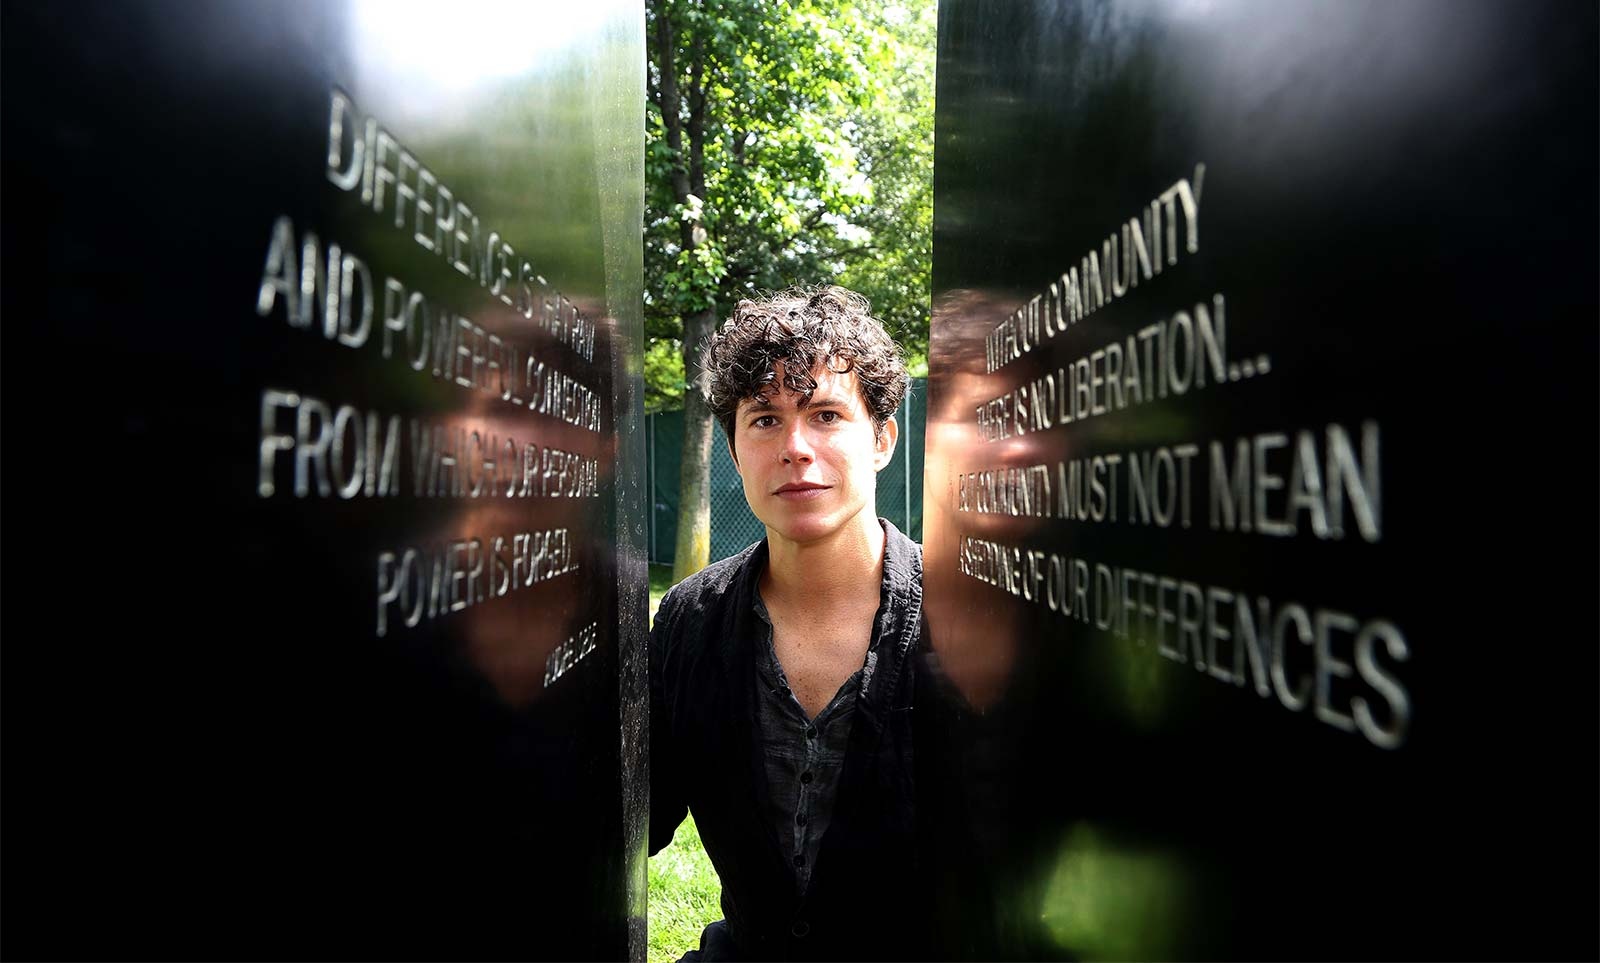  Sculptor Anthony Goicolea next to his LGBT Memorial Honoring Victims of Hate, Intolerance and Violence at the Hudson River Park. 